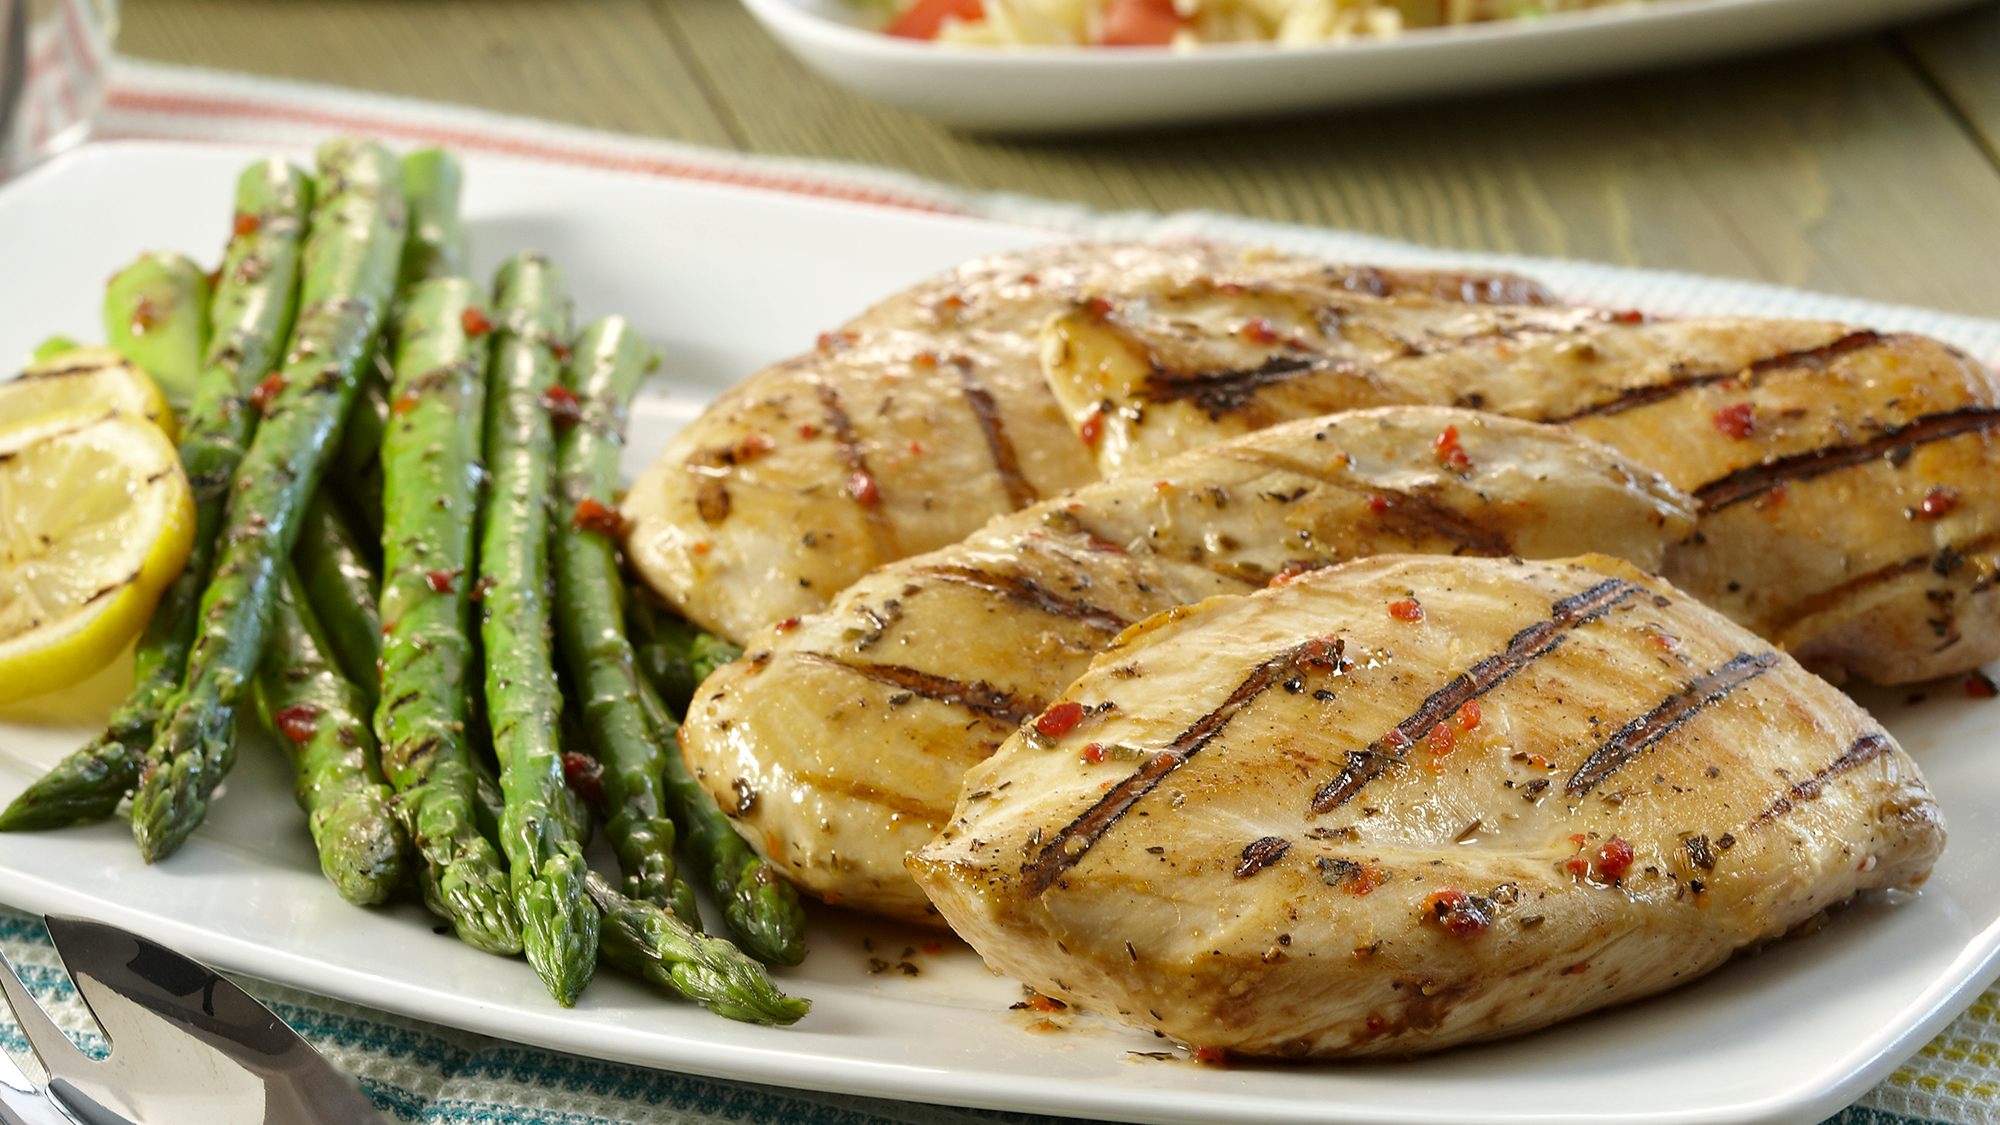 Grilled chicken and asparagus with lemon slice.